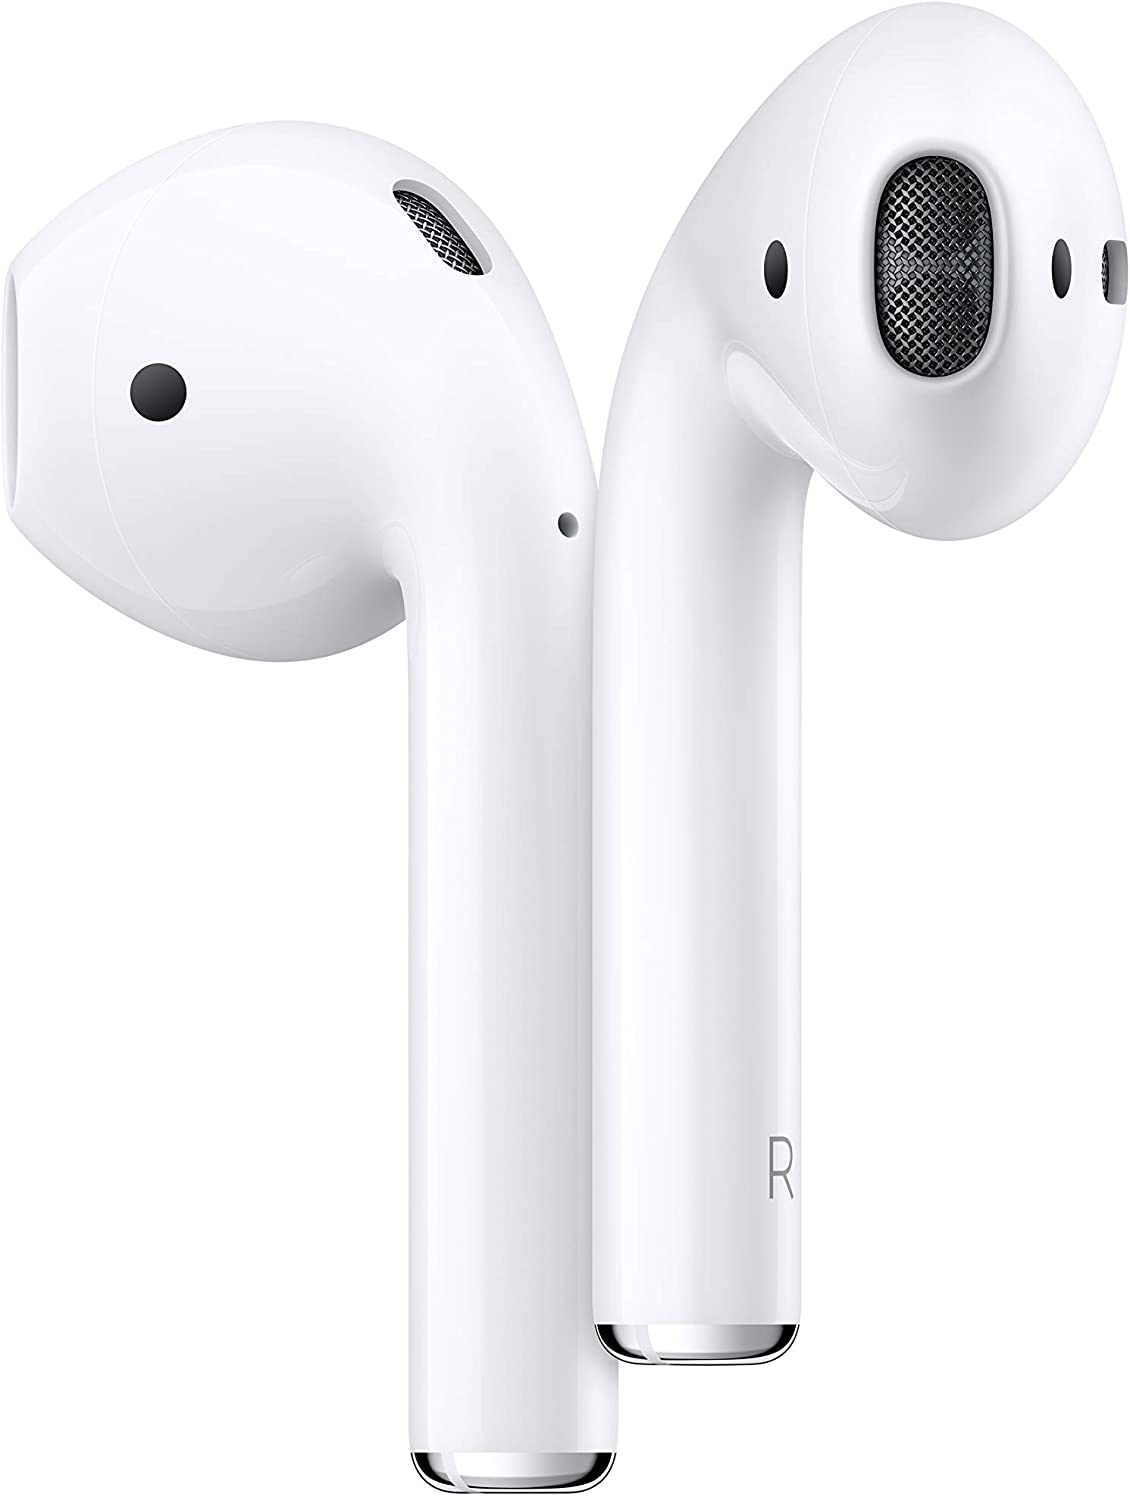 Apple 2nd Generation AirPods Automatic Wireless Earbuds